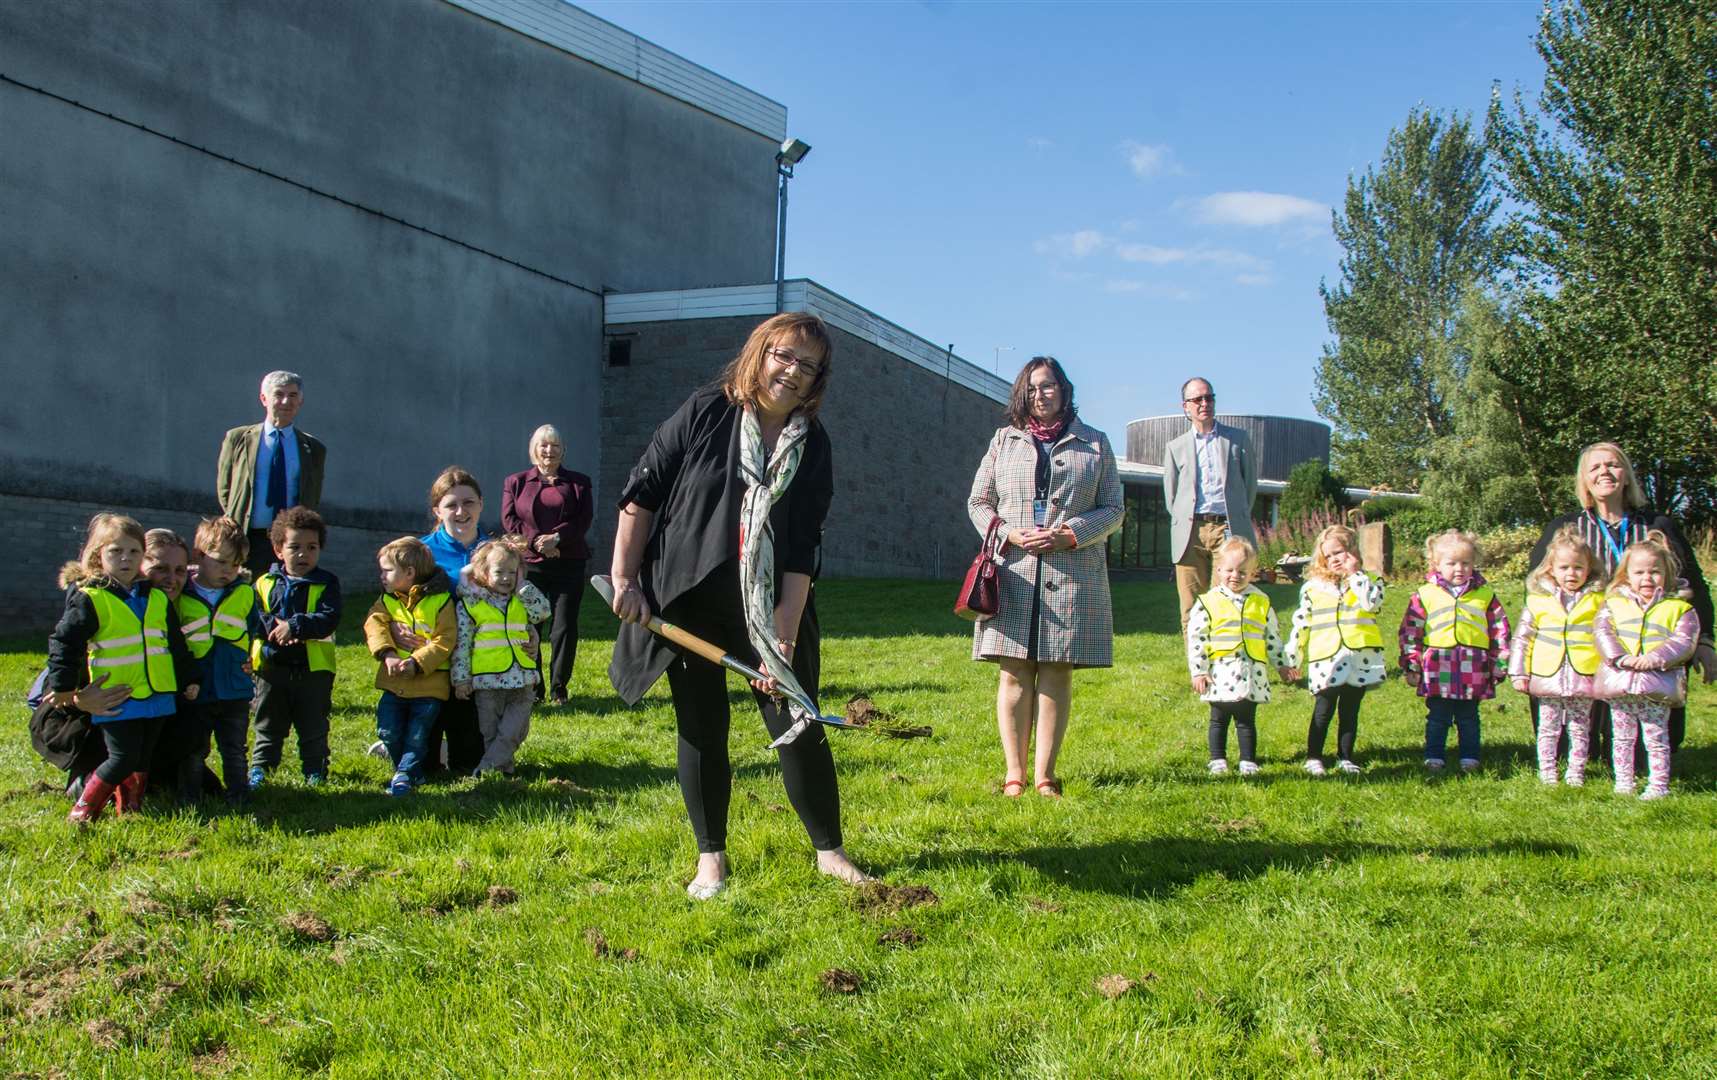 Cllr Sonya Warren, Chair of the Children and Young Peopleâs Services Committee (front) cuts the first turf for the new nursery building in Keith. ..Joining her are (from back left) Cllr Donald Gatt, Cllr Teresa Coull, Cllr Laura Powell and Project manager for ELC expansion Robin Paterson and Eleanor Smith (kneeling right) Nursery Manager for Flexible Childcare Services...Picture: Becky Saunderson..